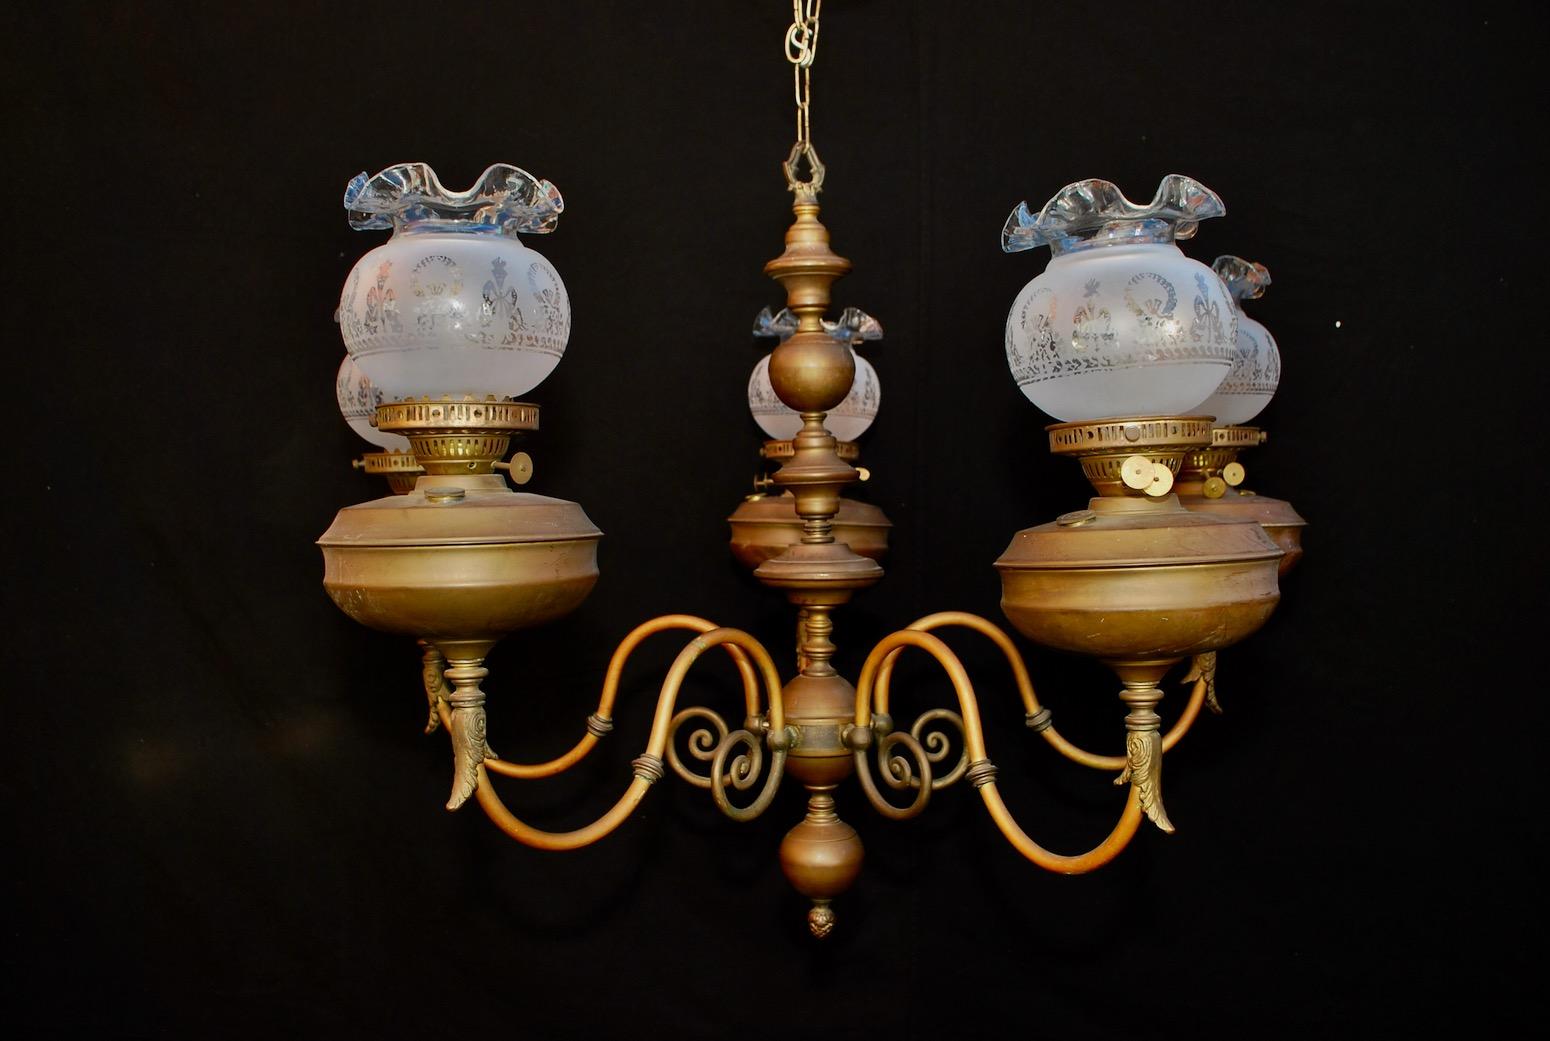 We also have our own line of wrought iron reproduction sconces and chandeliers, or we could do your own design
A nice late 19th century brass chandelier, originally it was oil lamp that was converted to electricity
the patina is much nicer in